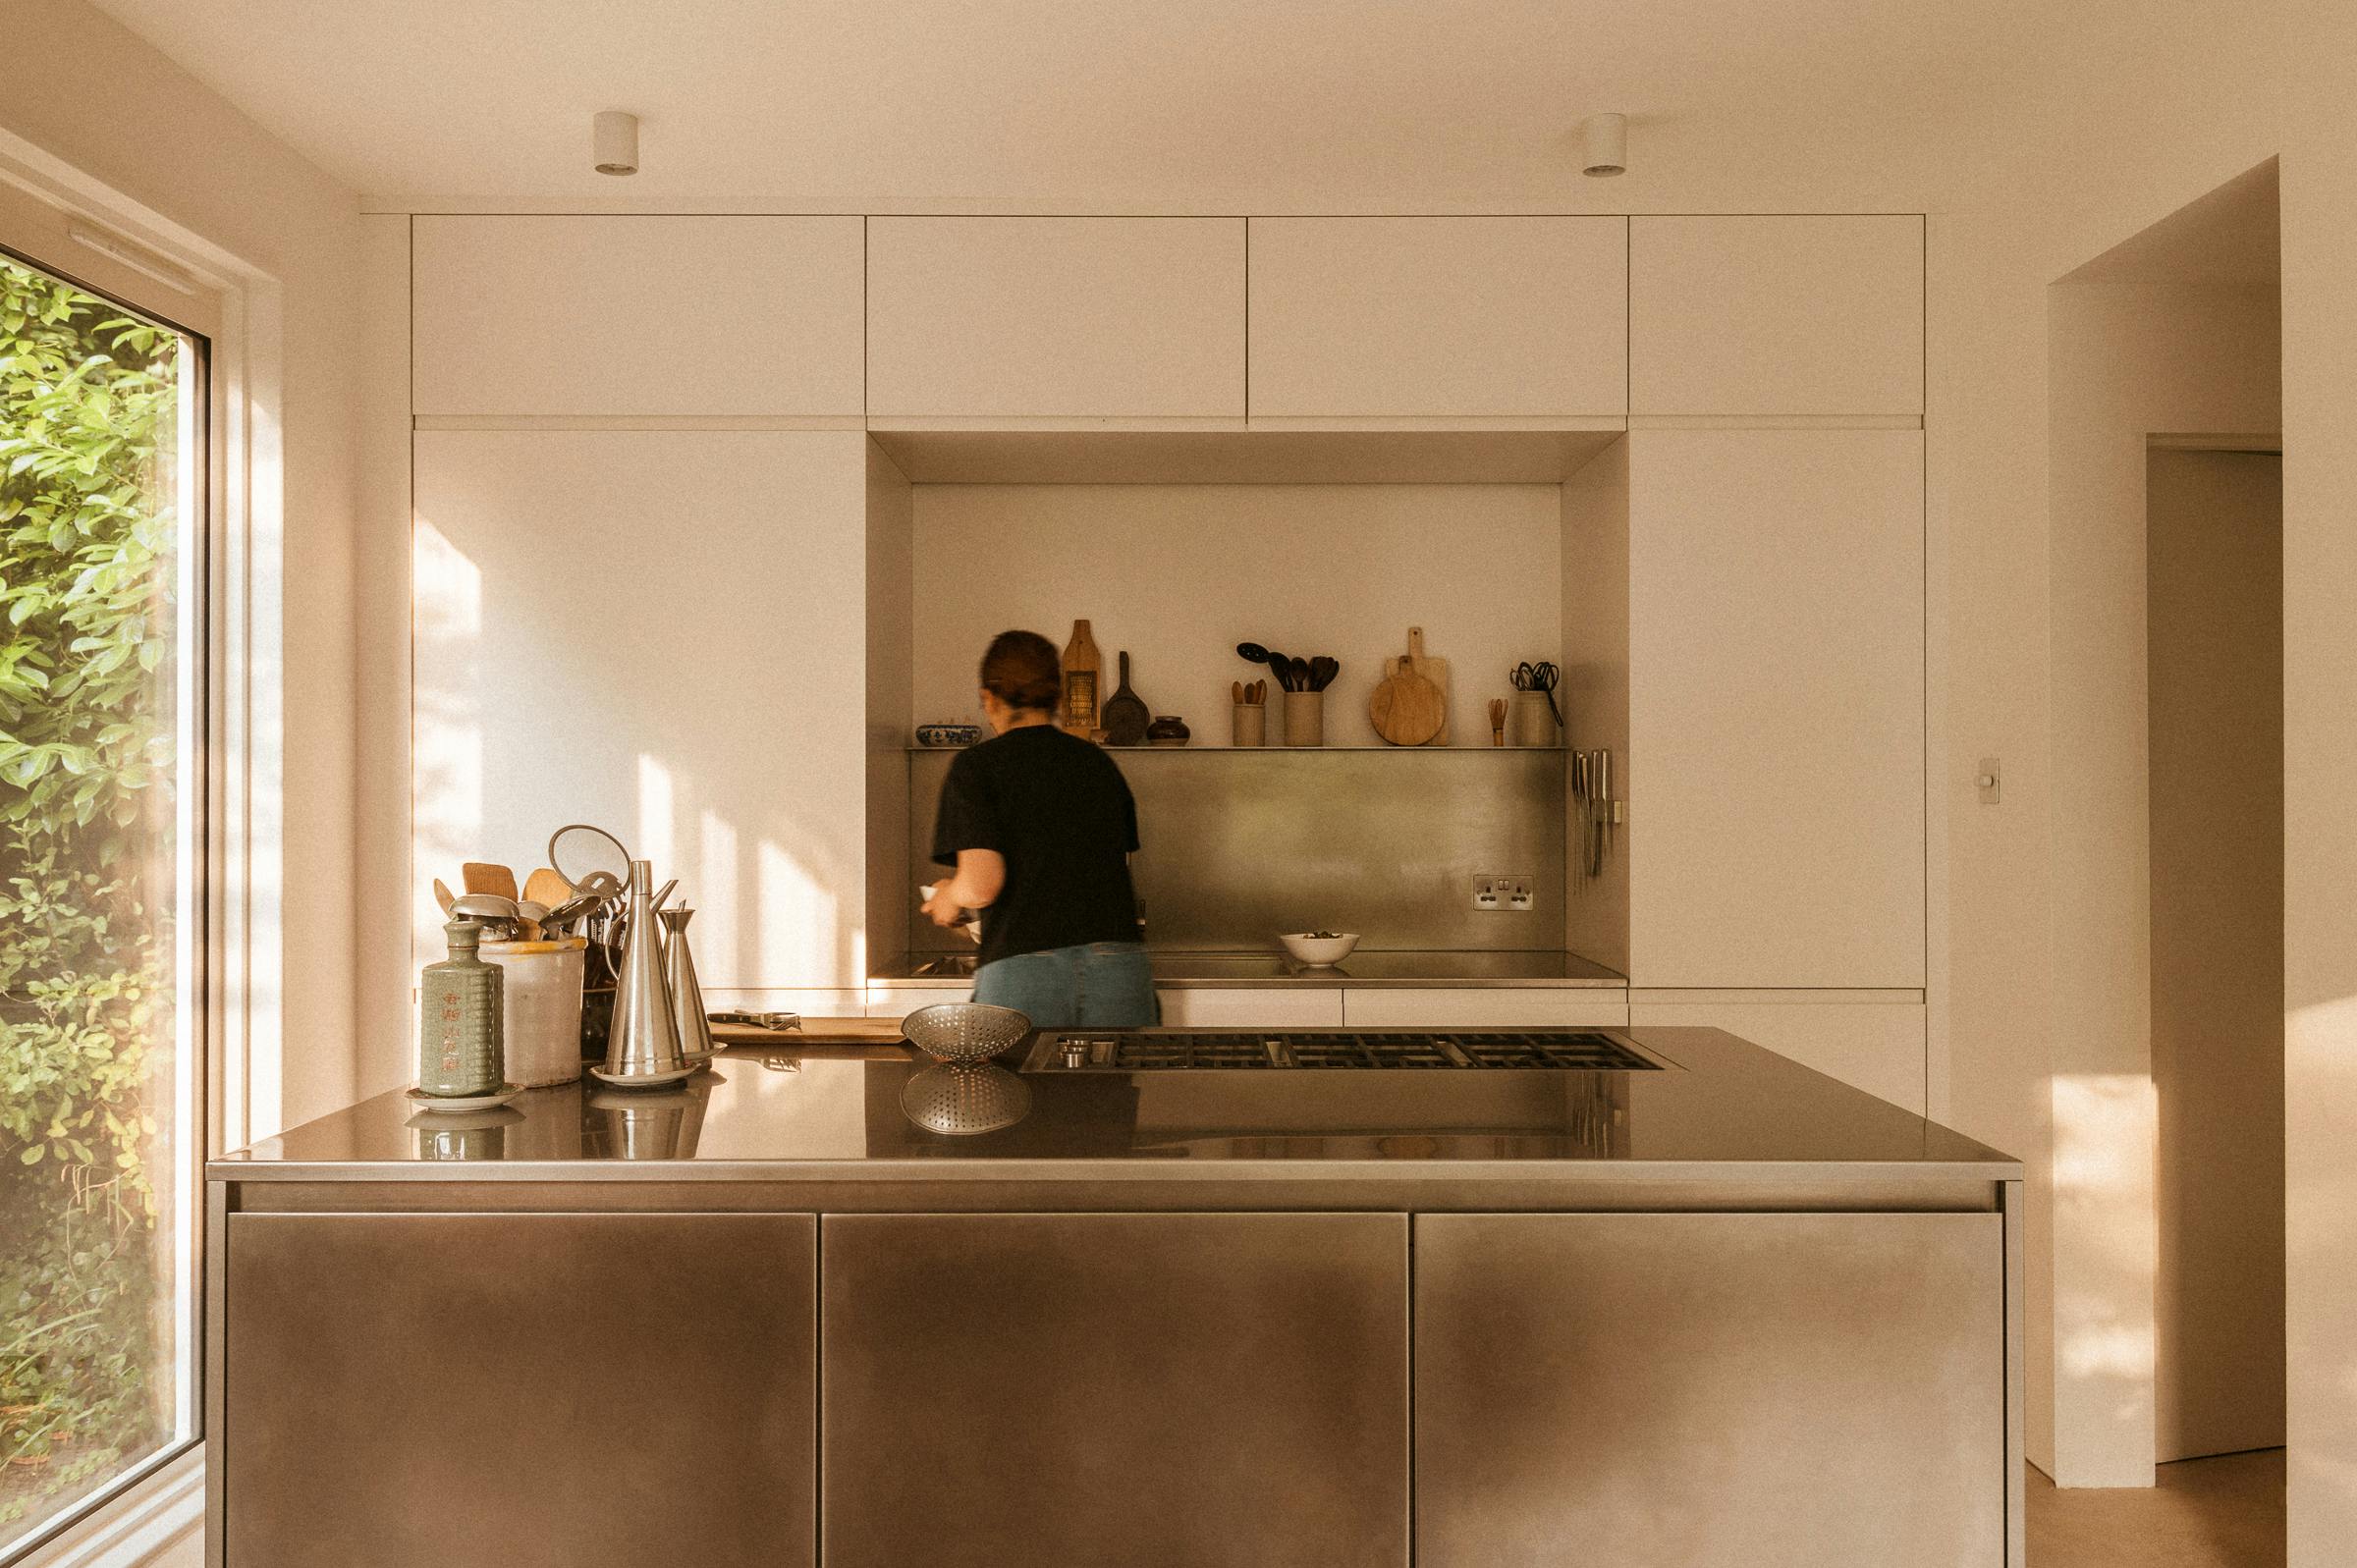 White painted and stainless steel Ma-kon kitchen in Dulwich, South London